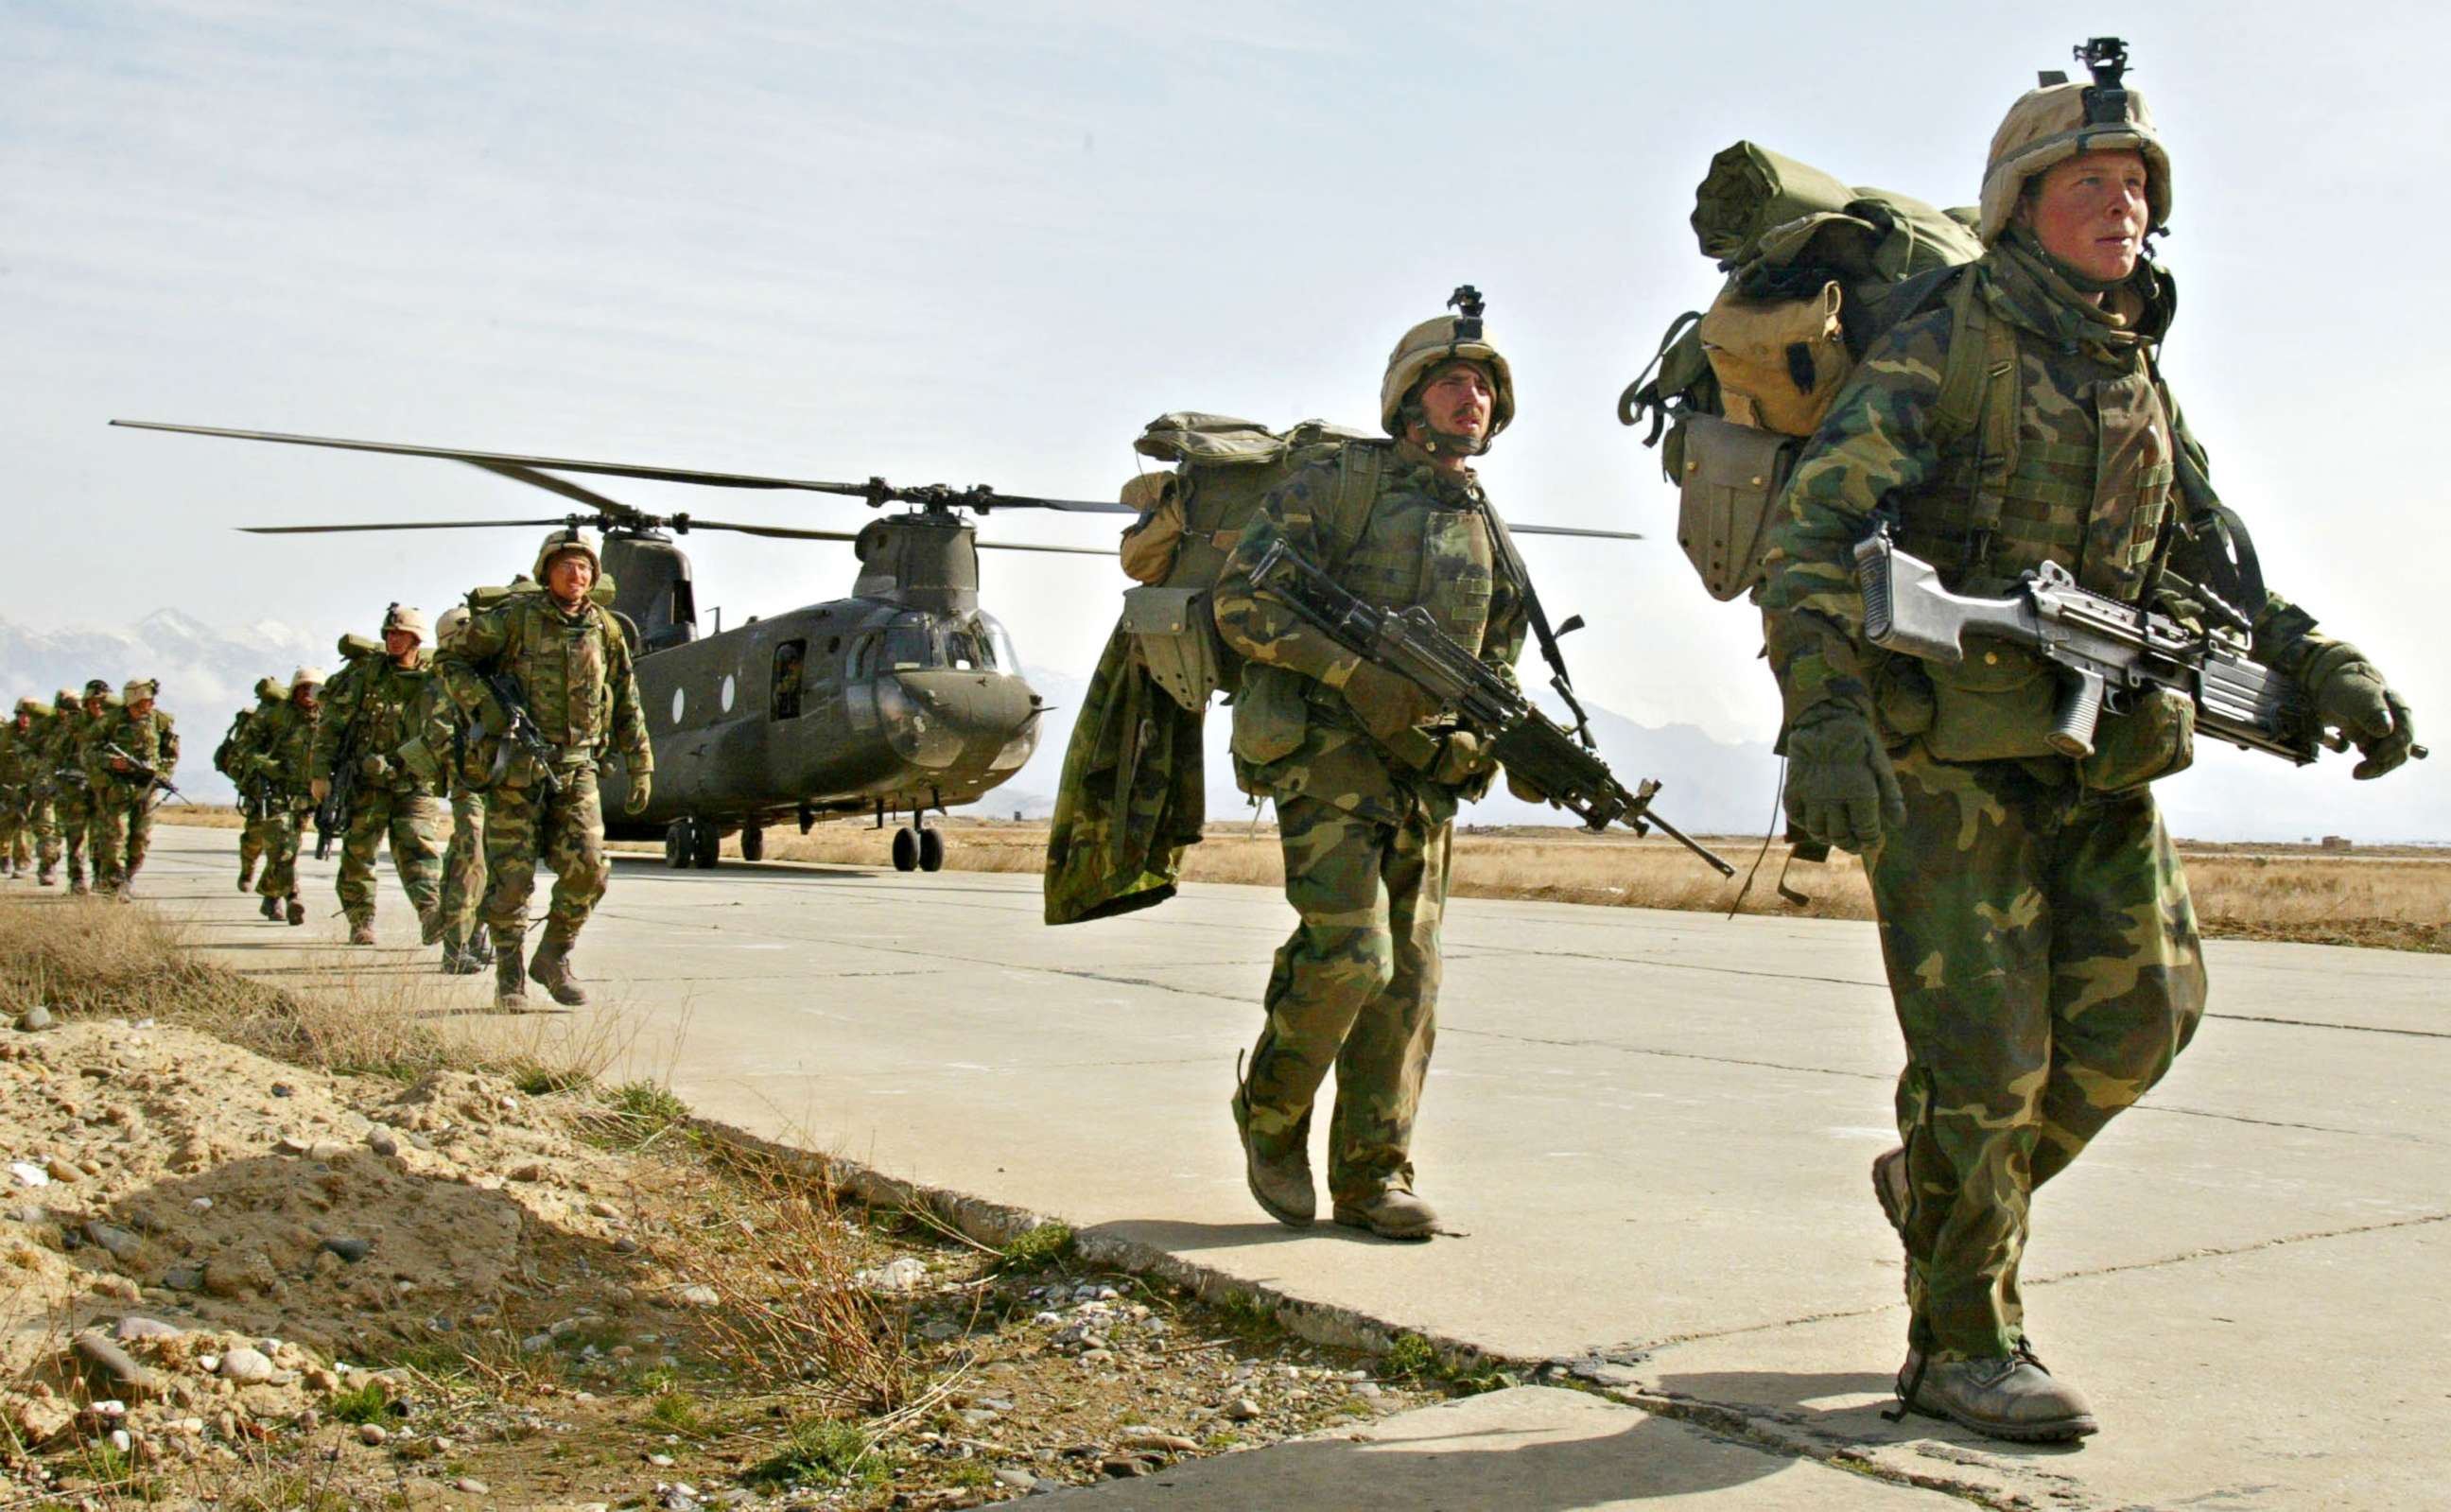 PHOTO: U.S. Army soldiers from the 10th Mountain and the 101st Airborne units disembark from a Chinook helicopter March 11, 2002 as they return to Bagram airbase from the fighting in eastern Afghanistan.